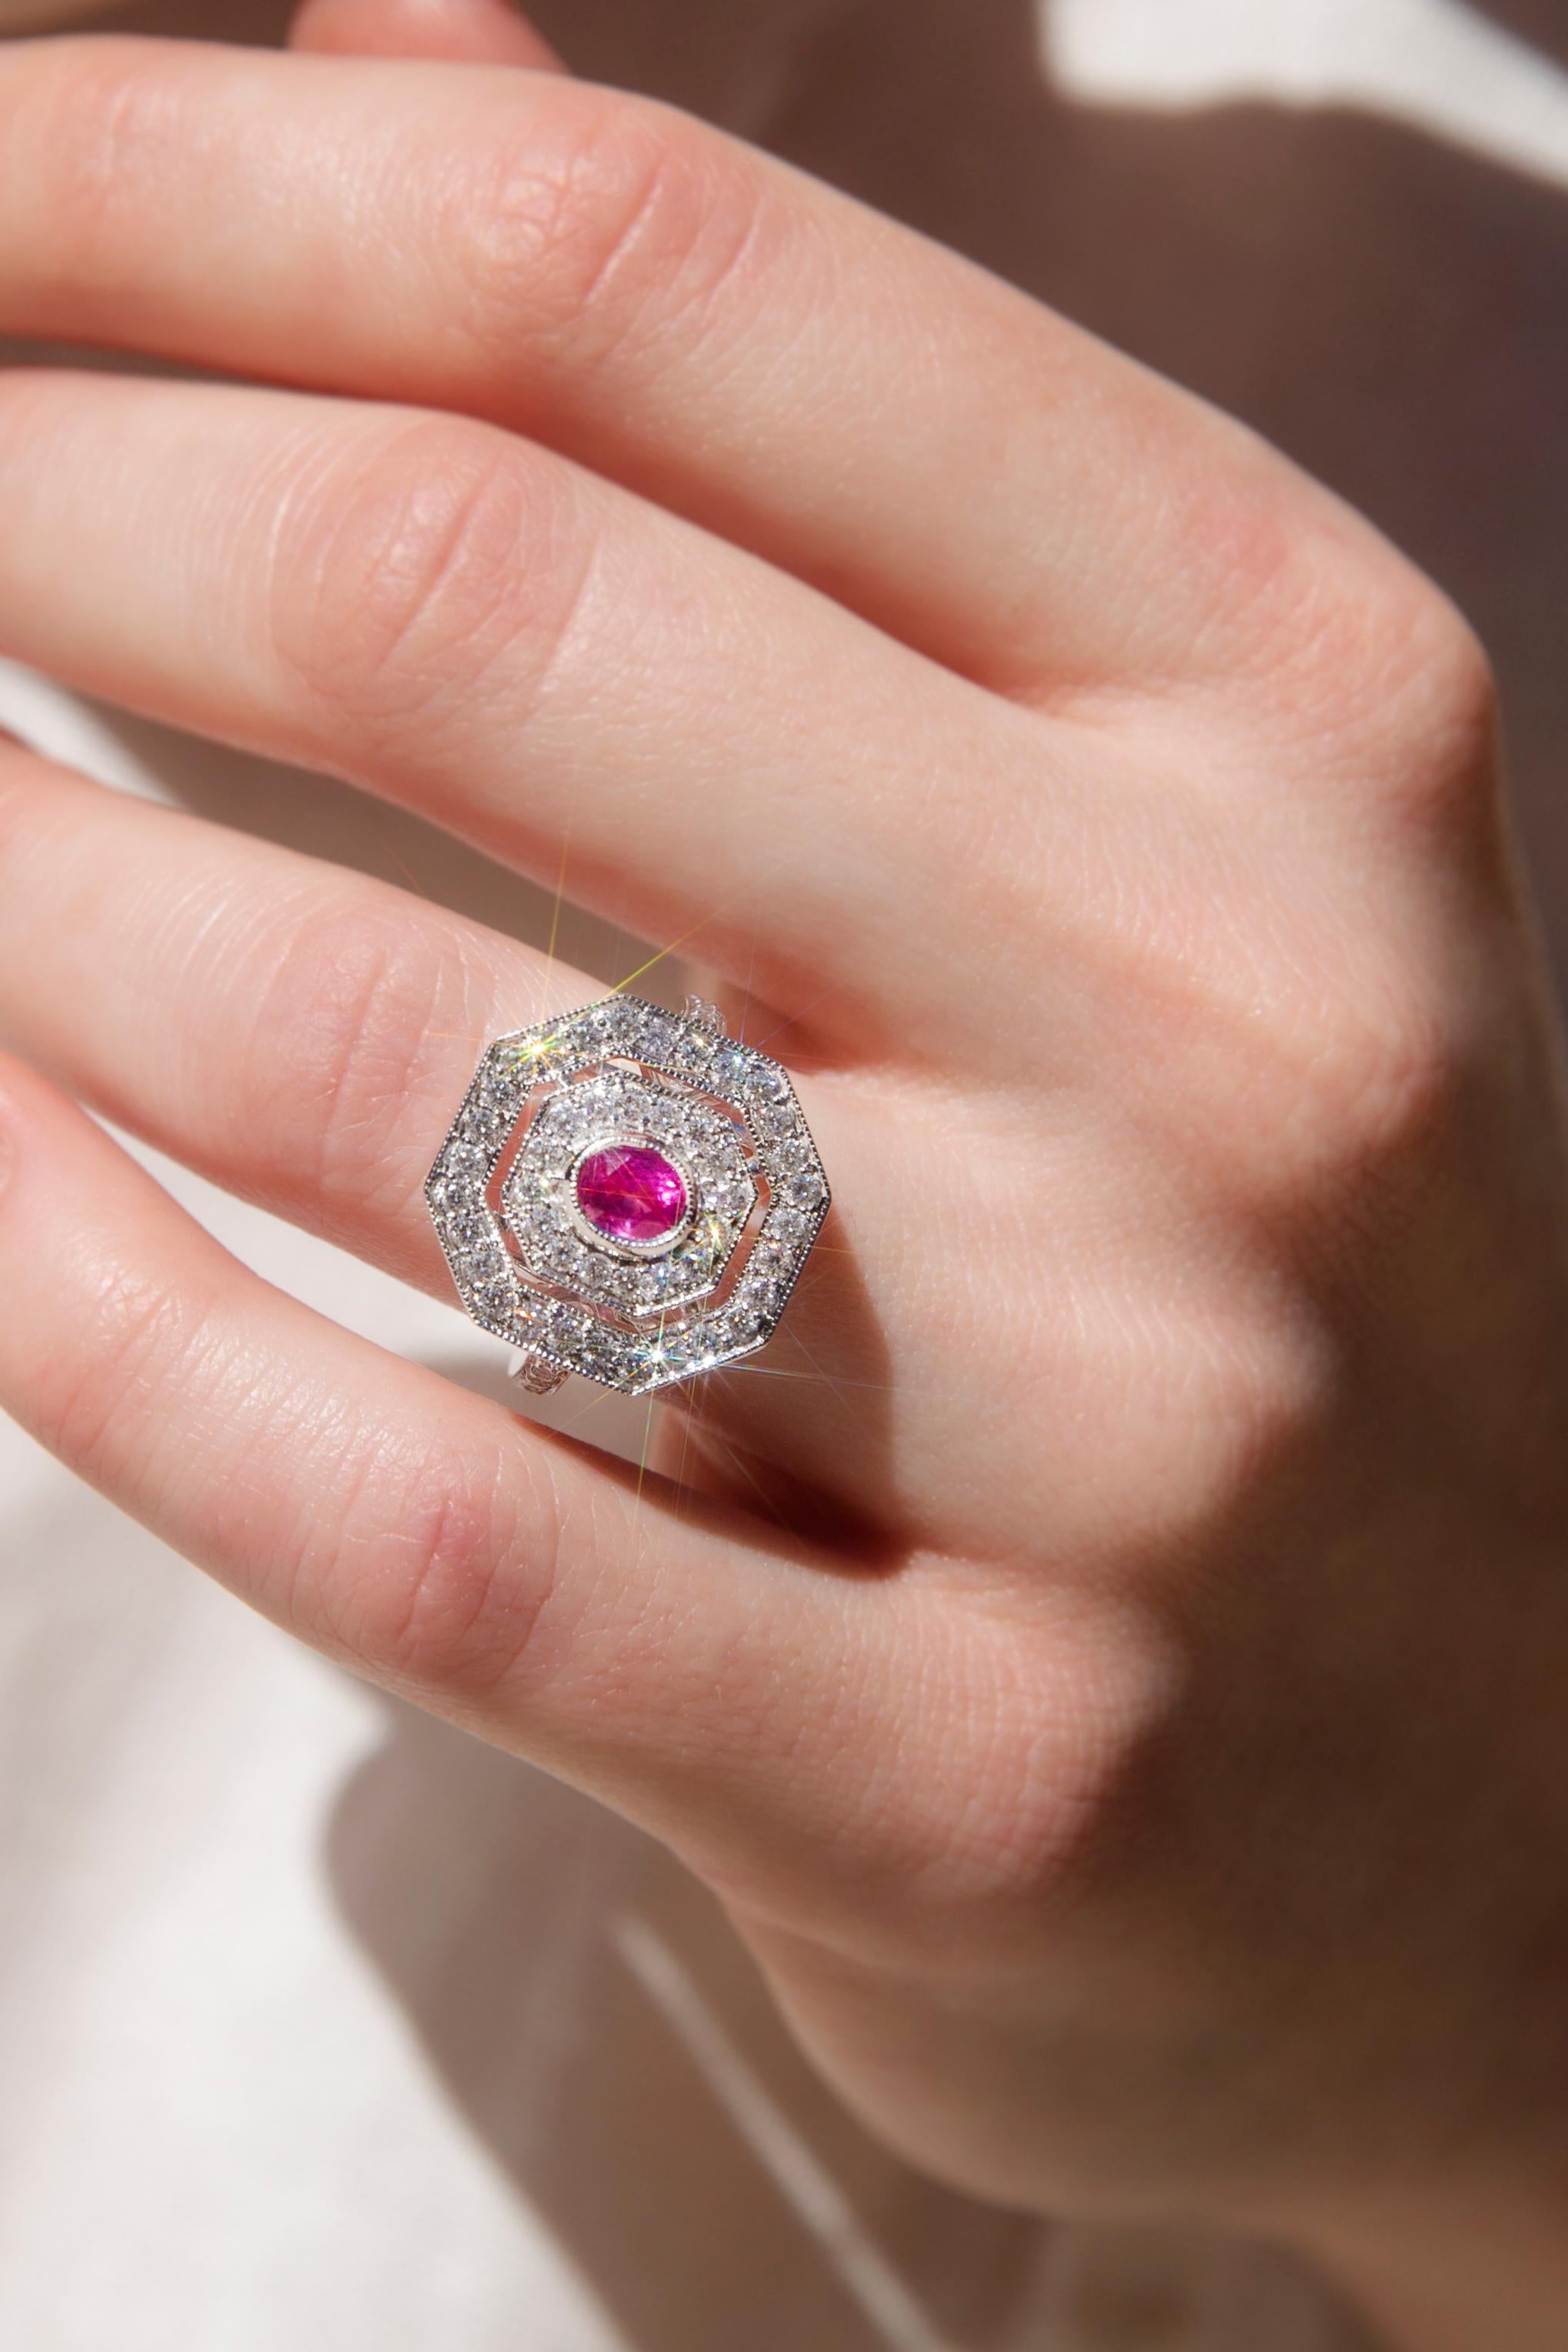 Crafted with love and devotion, this captivating 18 carat white gold milgrain cluster ring features an alluring central oval natural ruby with a double hexagonal border set with a plethora of shimmering round brilliant cut diamonds and with further